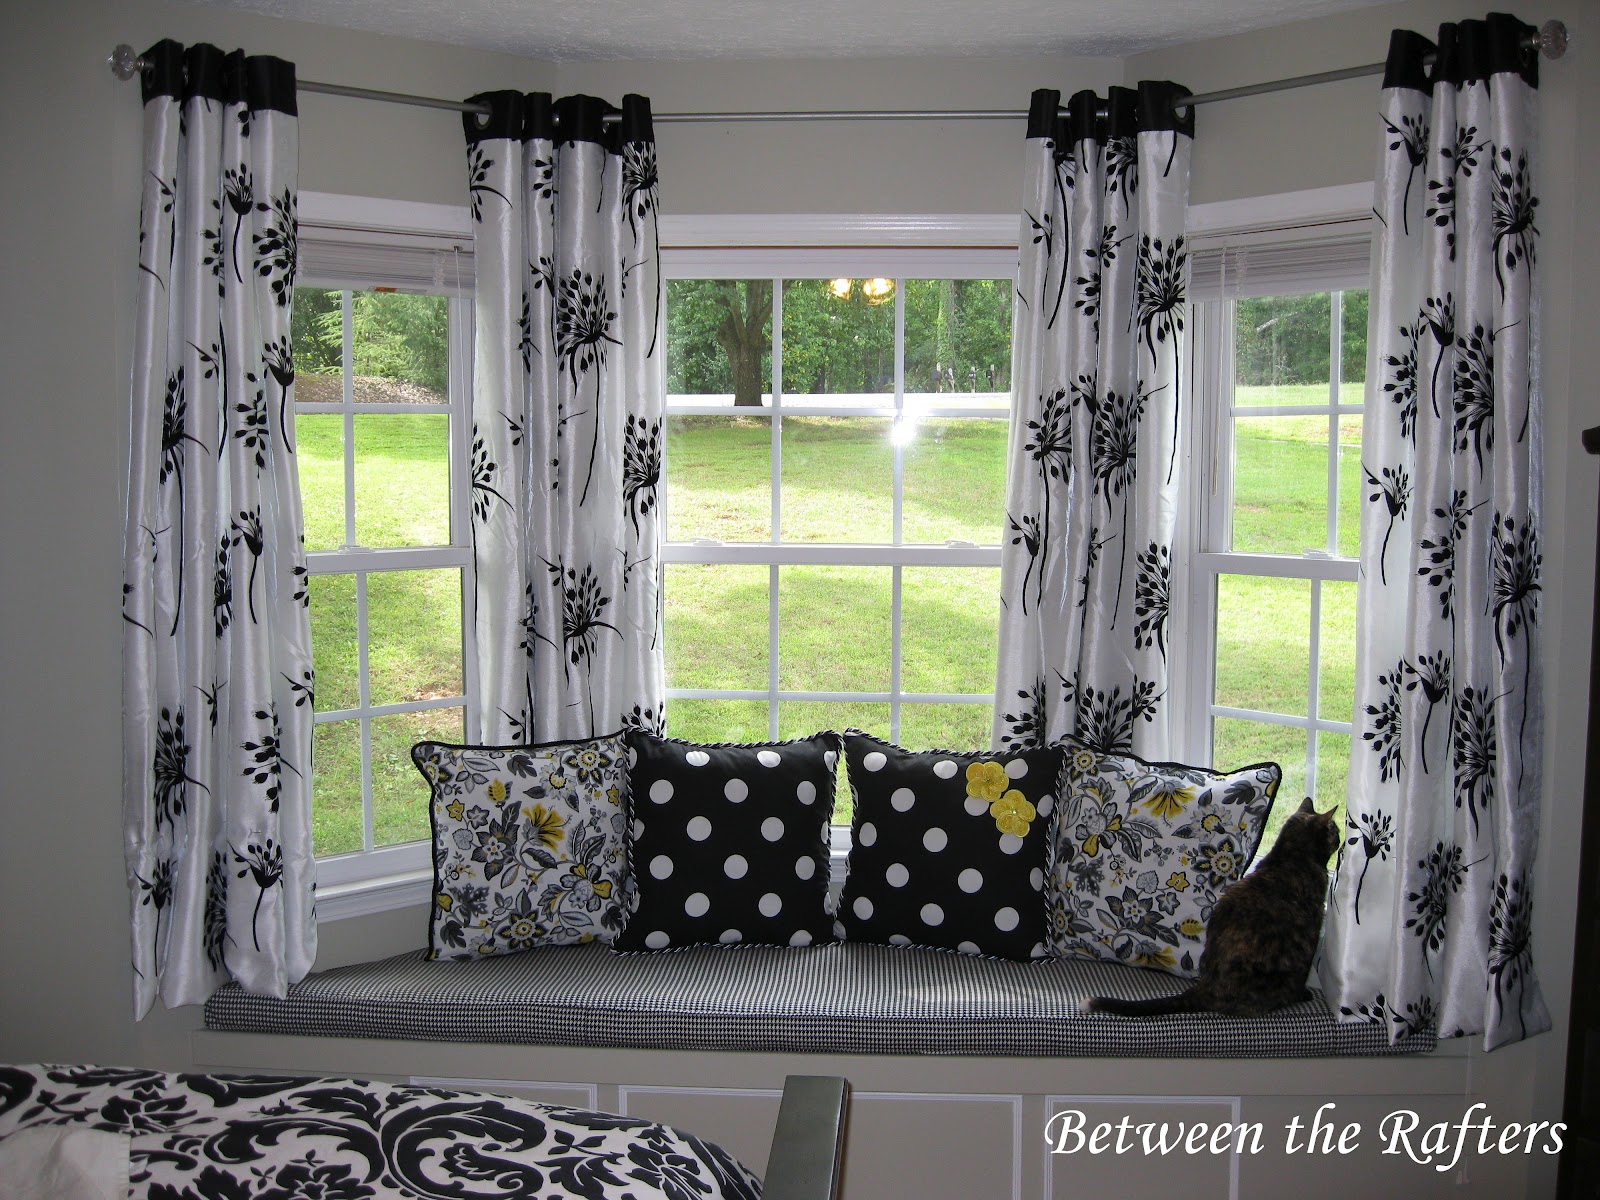 How To Put Curtains In A Bay Window How to Design a Bay Window